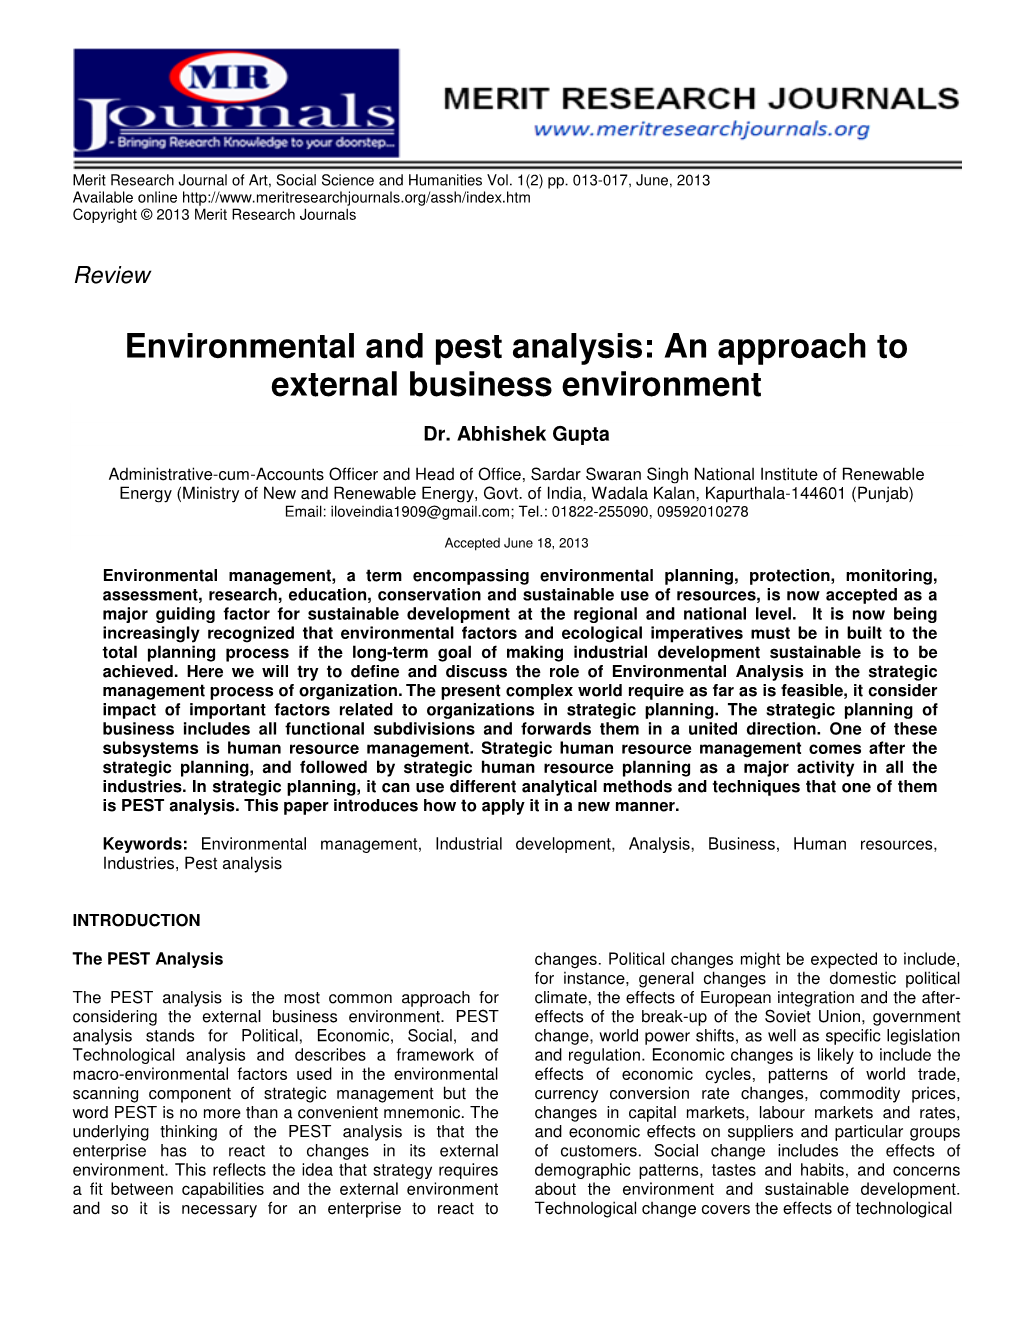 Environmental and Pest Analysis: an Approach to External Business Environment